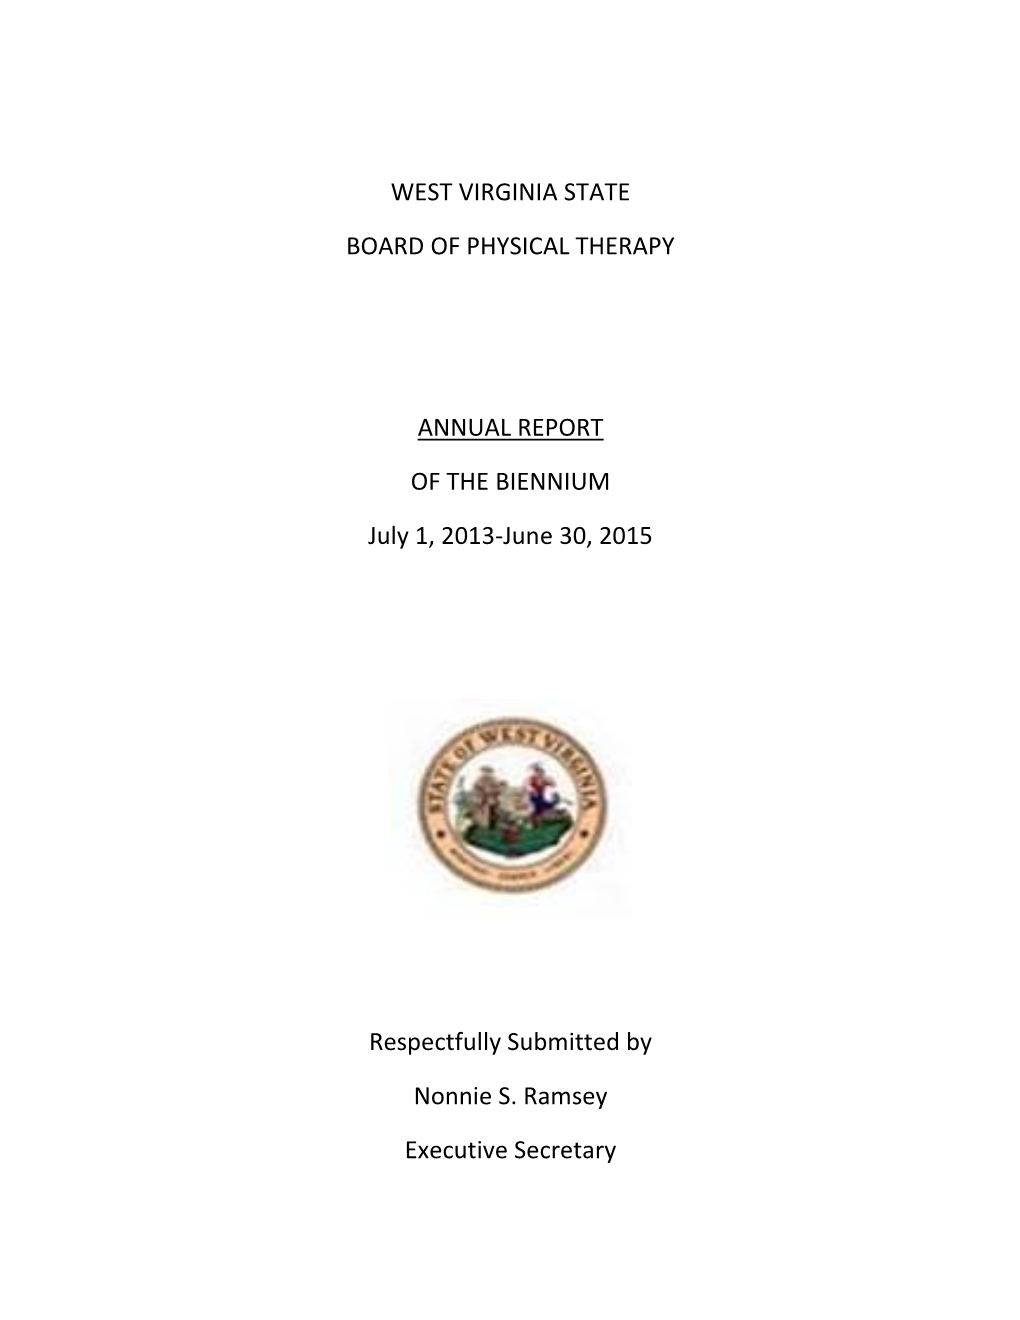 West Virginia State Board of Physical Therapy Annual